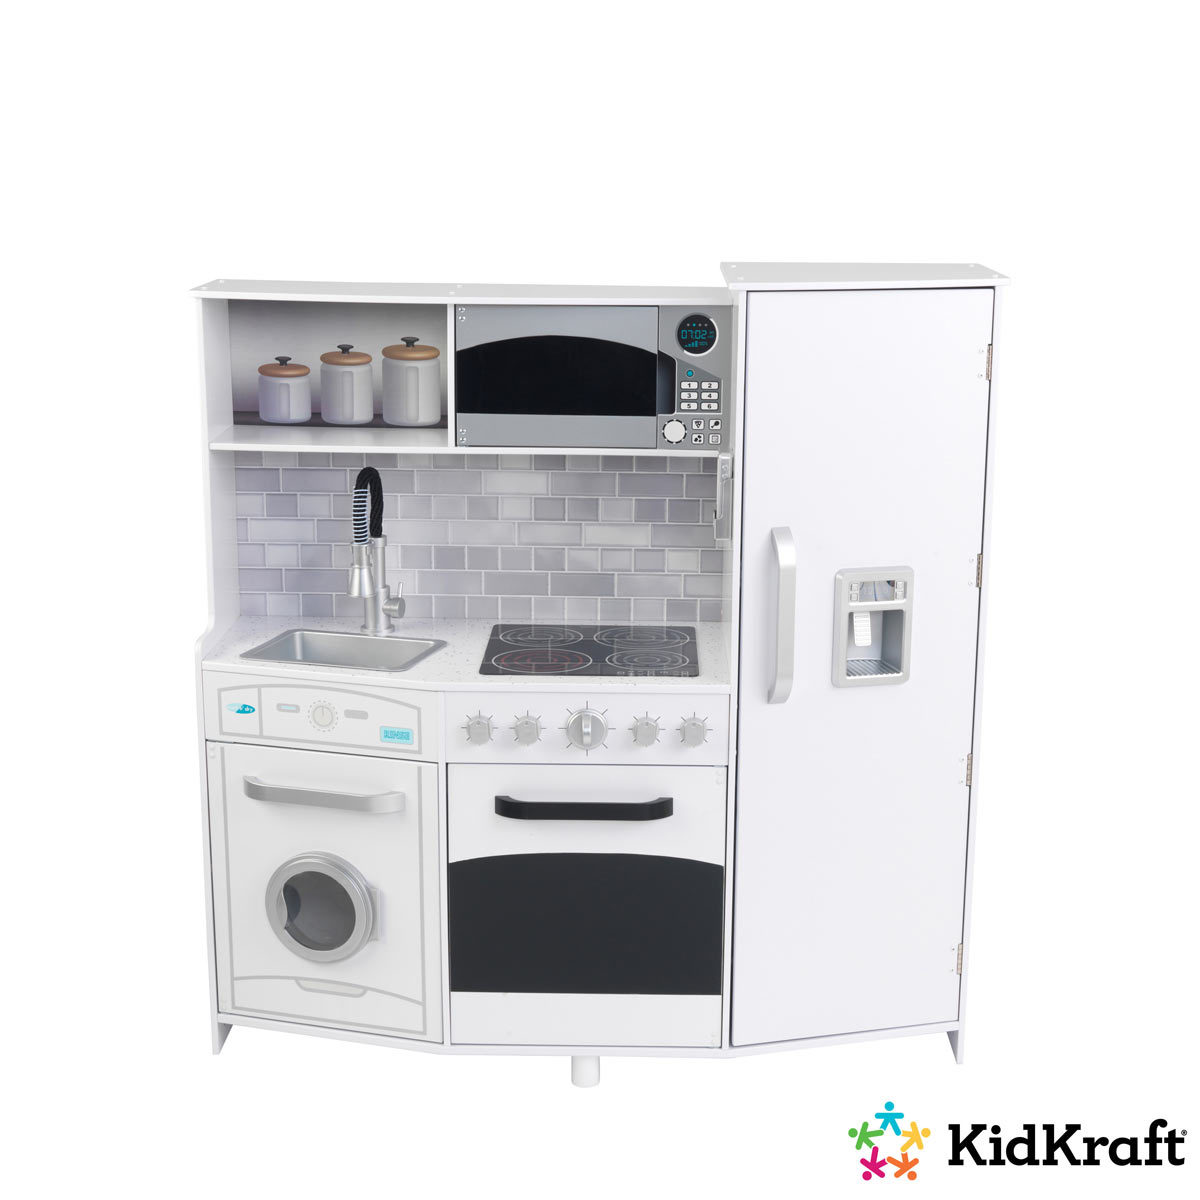 KidKraft Large Play Kitchen With Lights and Sound in White (3+ Years